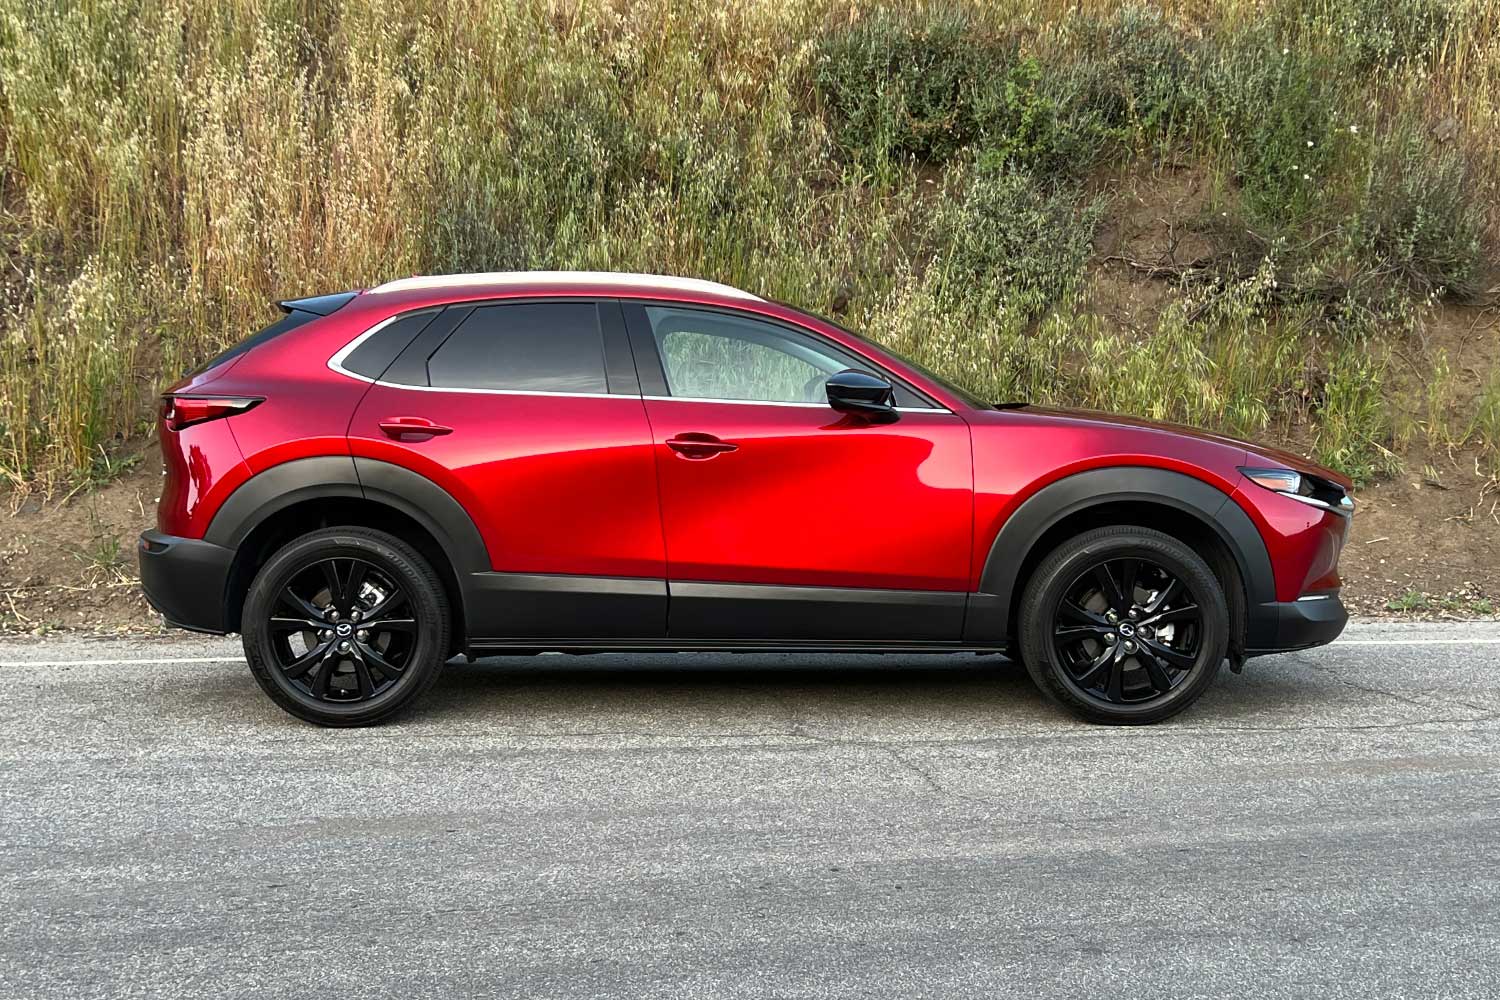 Side view of a red Mazda CX-30.